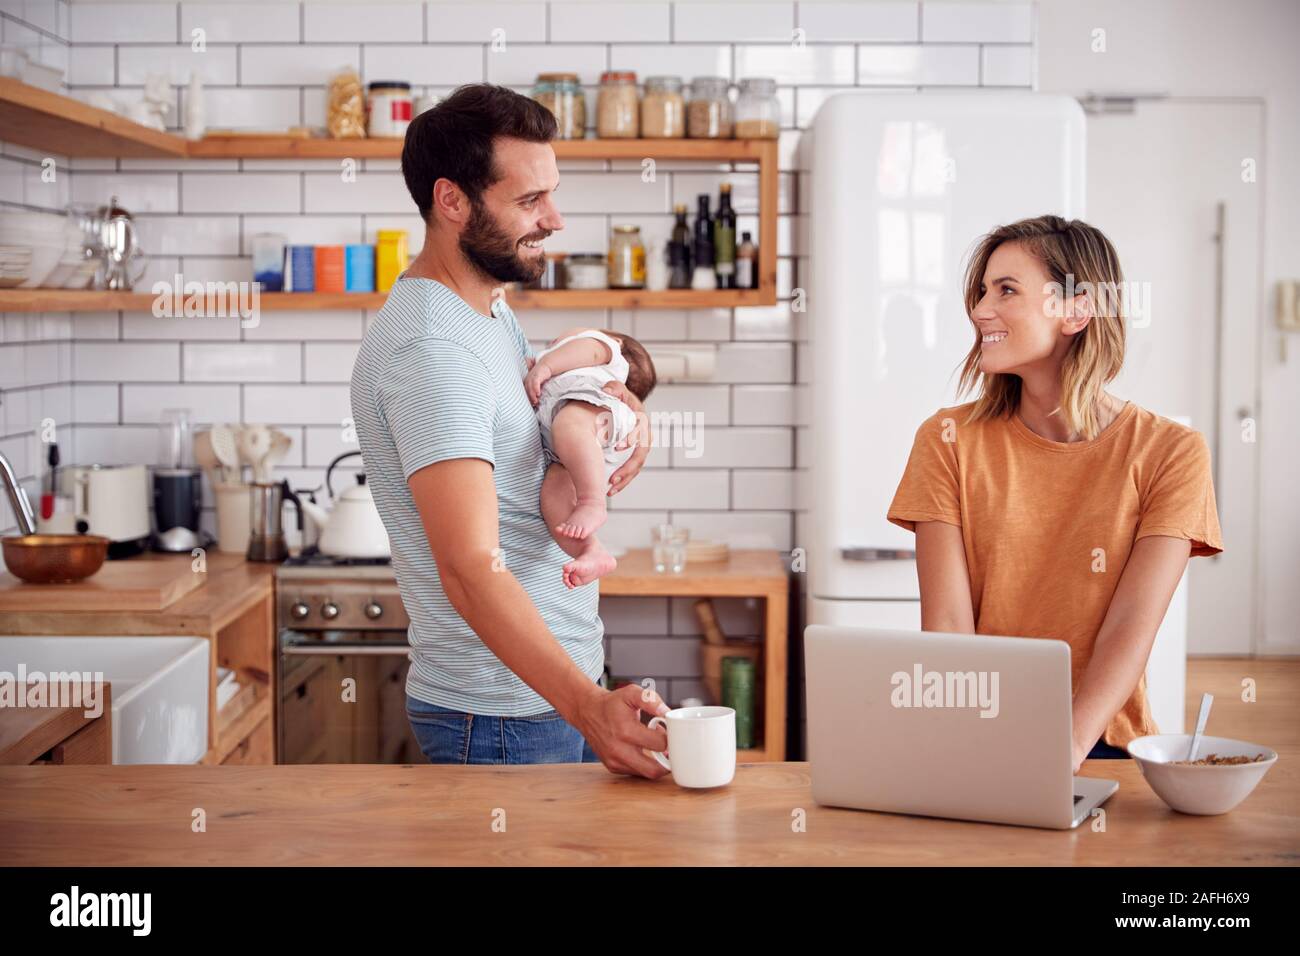 Multi-Tasking Father Holds Baby Son And Makes Hot Drink As Mother Uses Laptop And Eats Breakfast Stock Photo